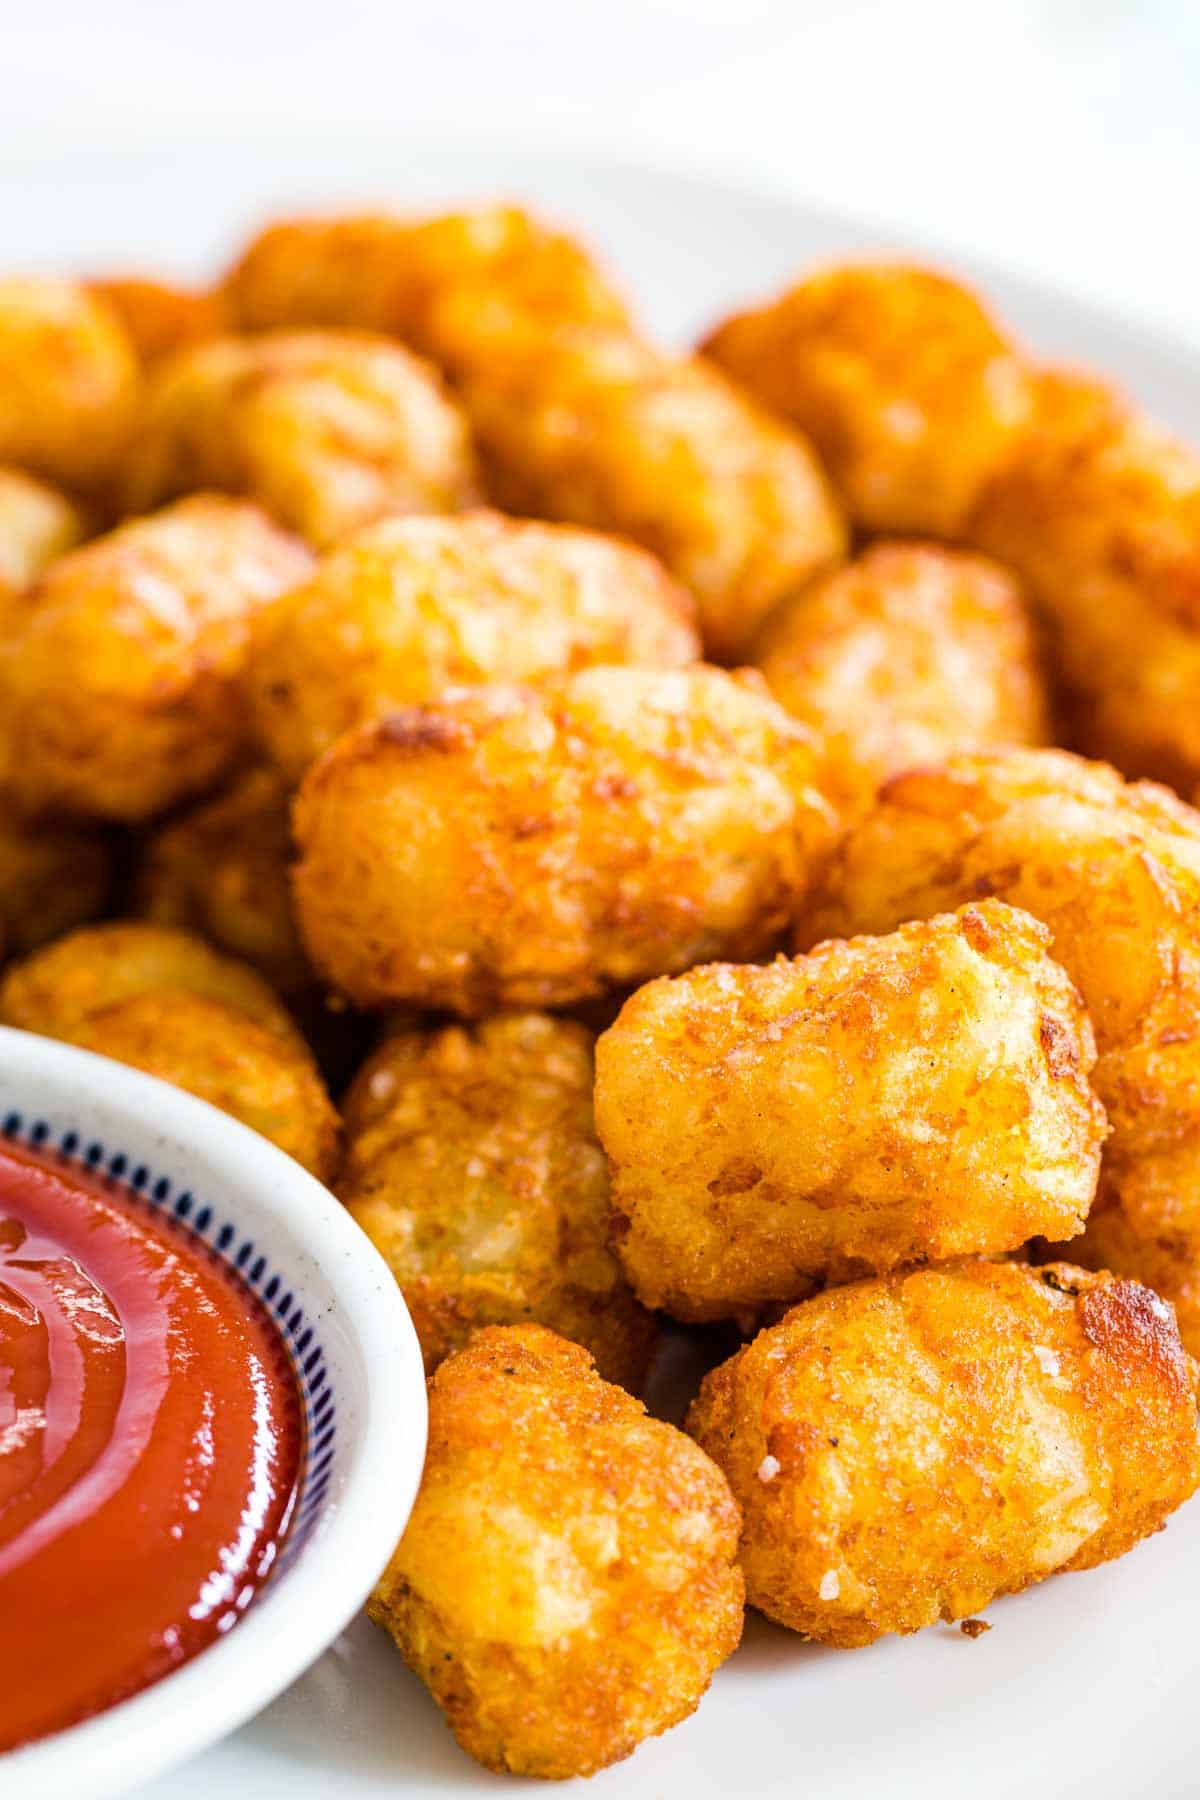 A white plate full of air fryer tater tots and ketchup.